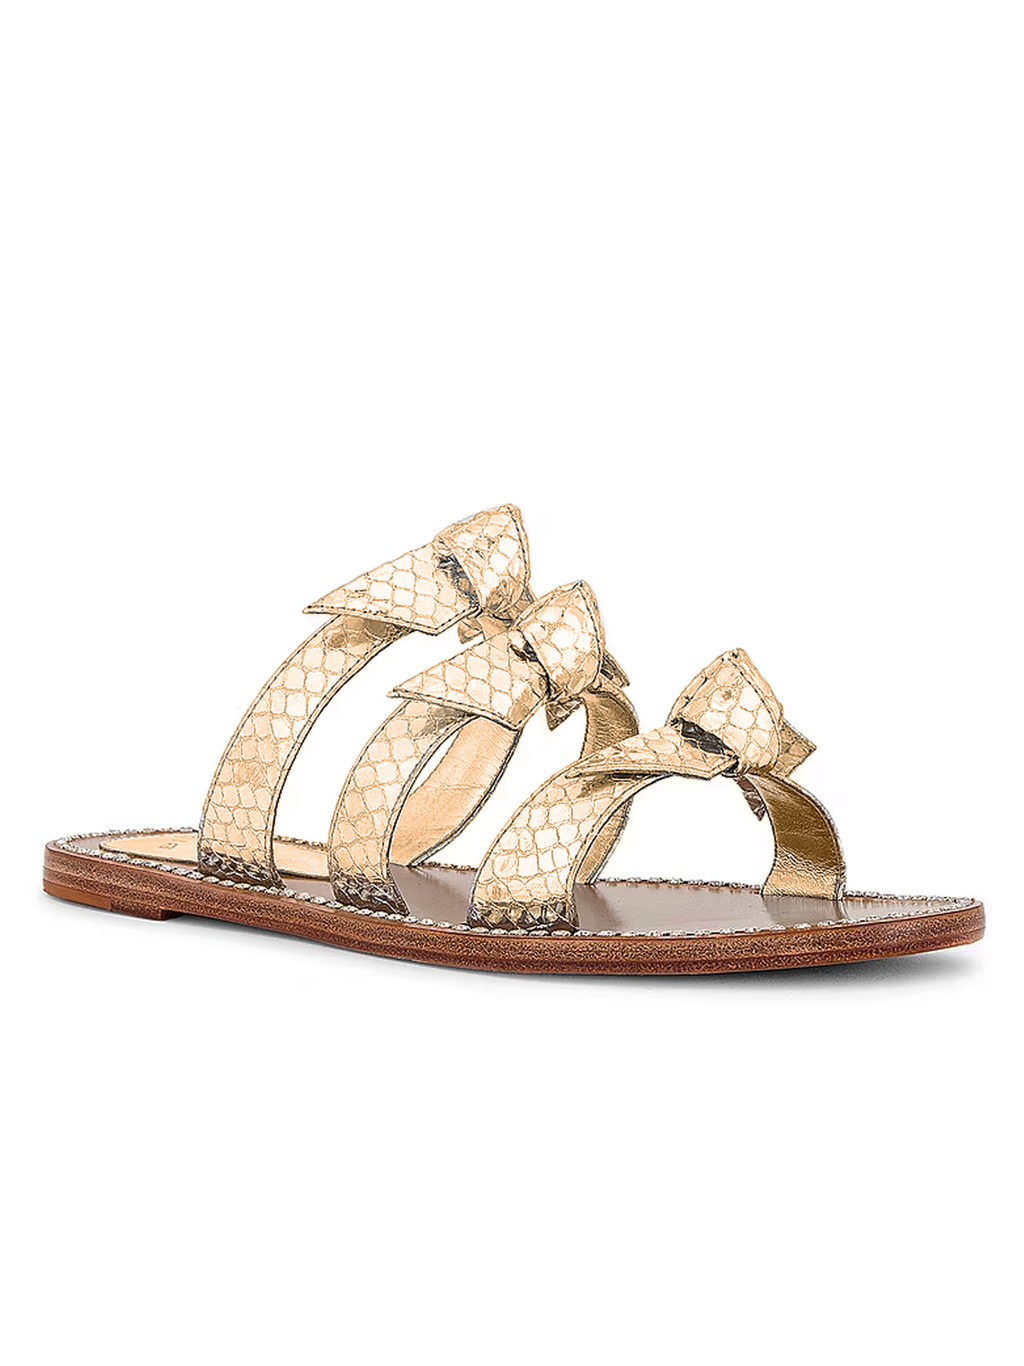 Lolita Flat Crystals Sandal in Shell Pink